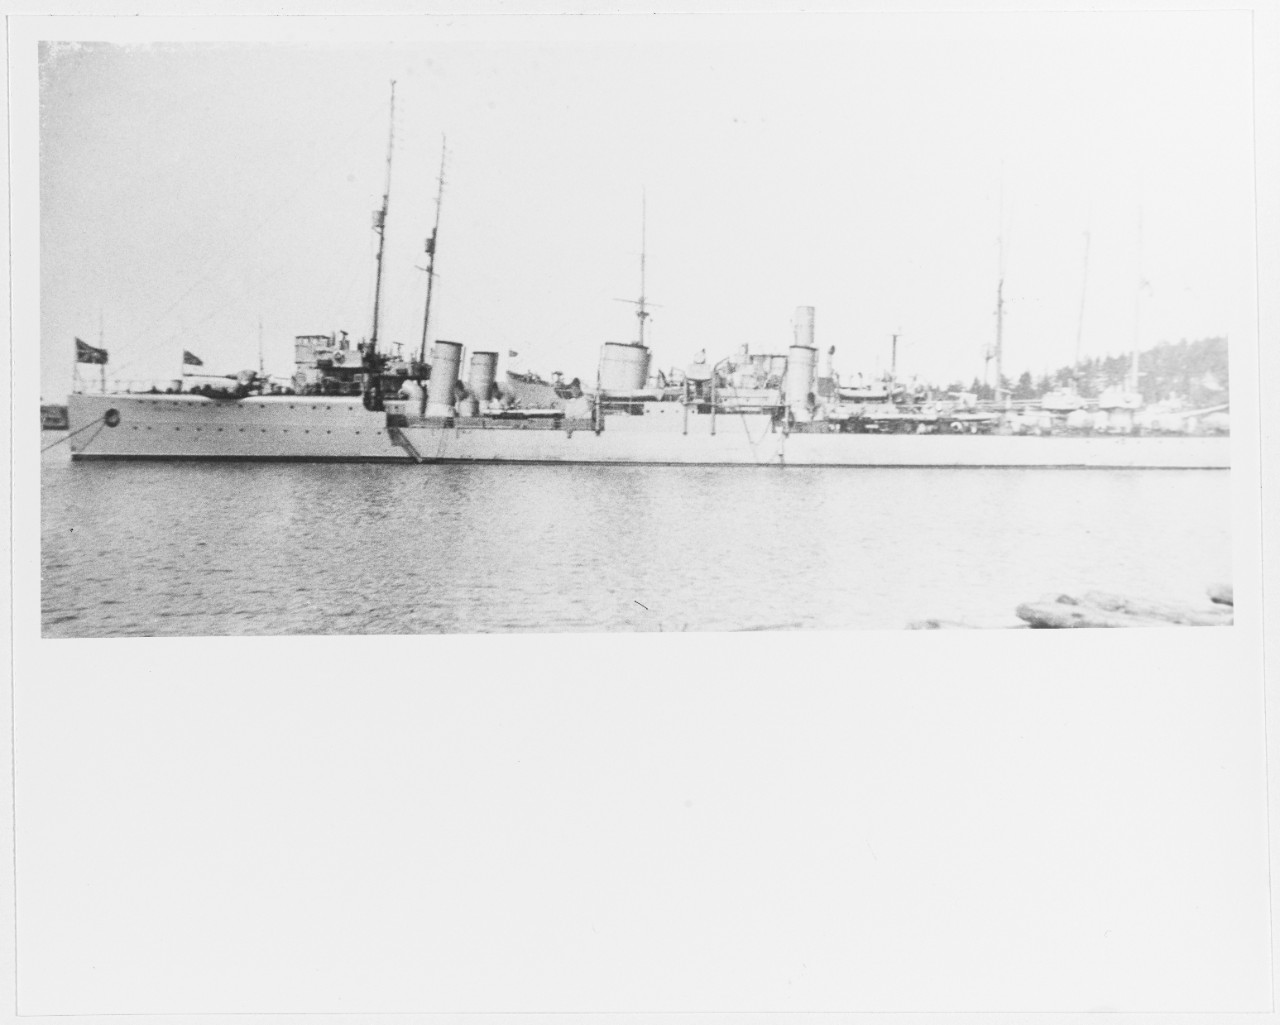 Two unidentified Russian "NOVIK" Type Destroyers during World War I.